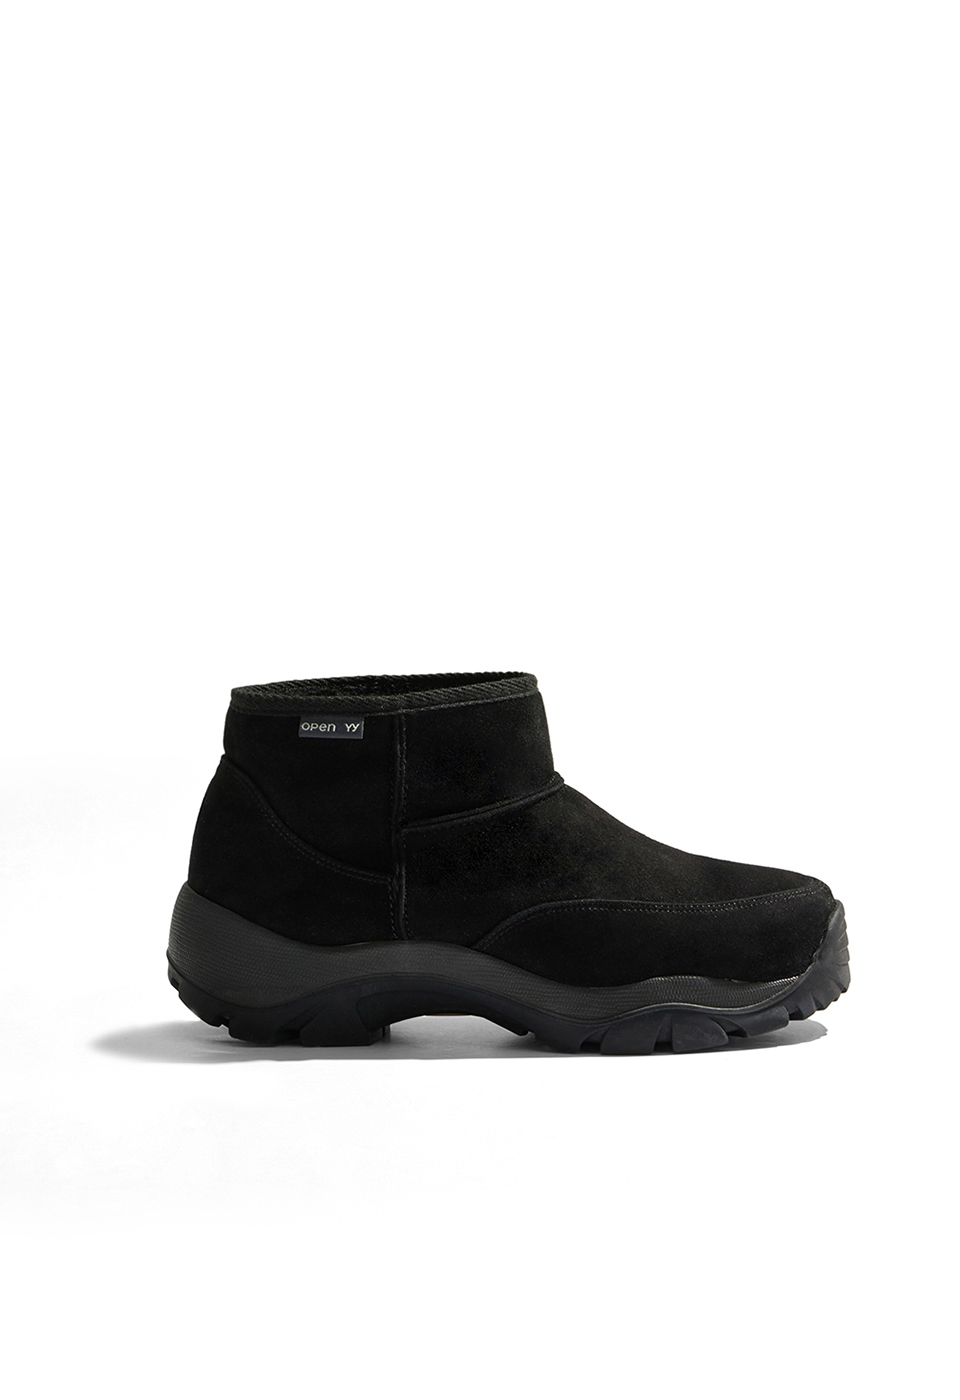 SUEDE MOUNTAIN ANKLE BOOTS, BLACK